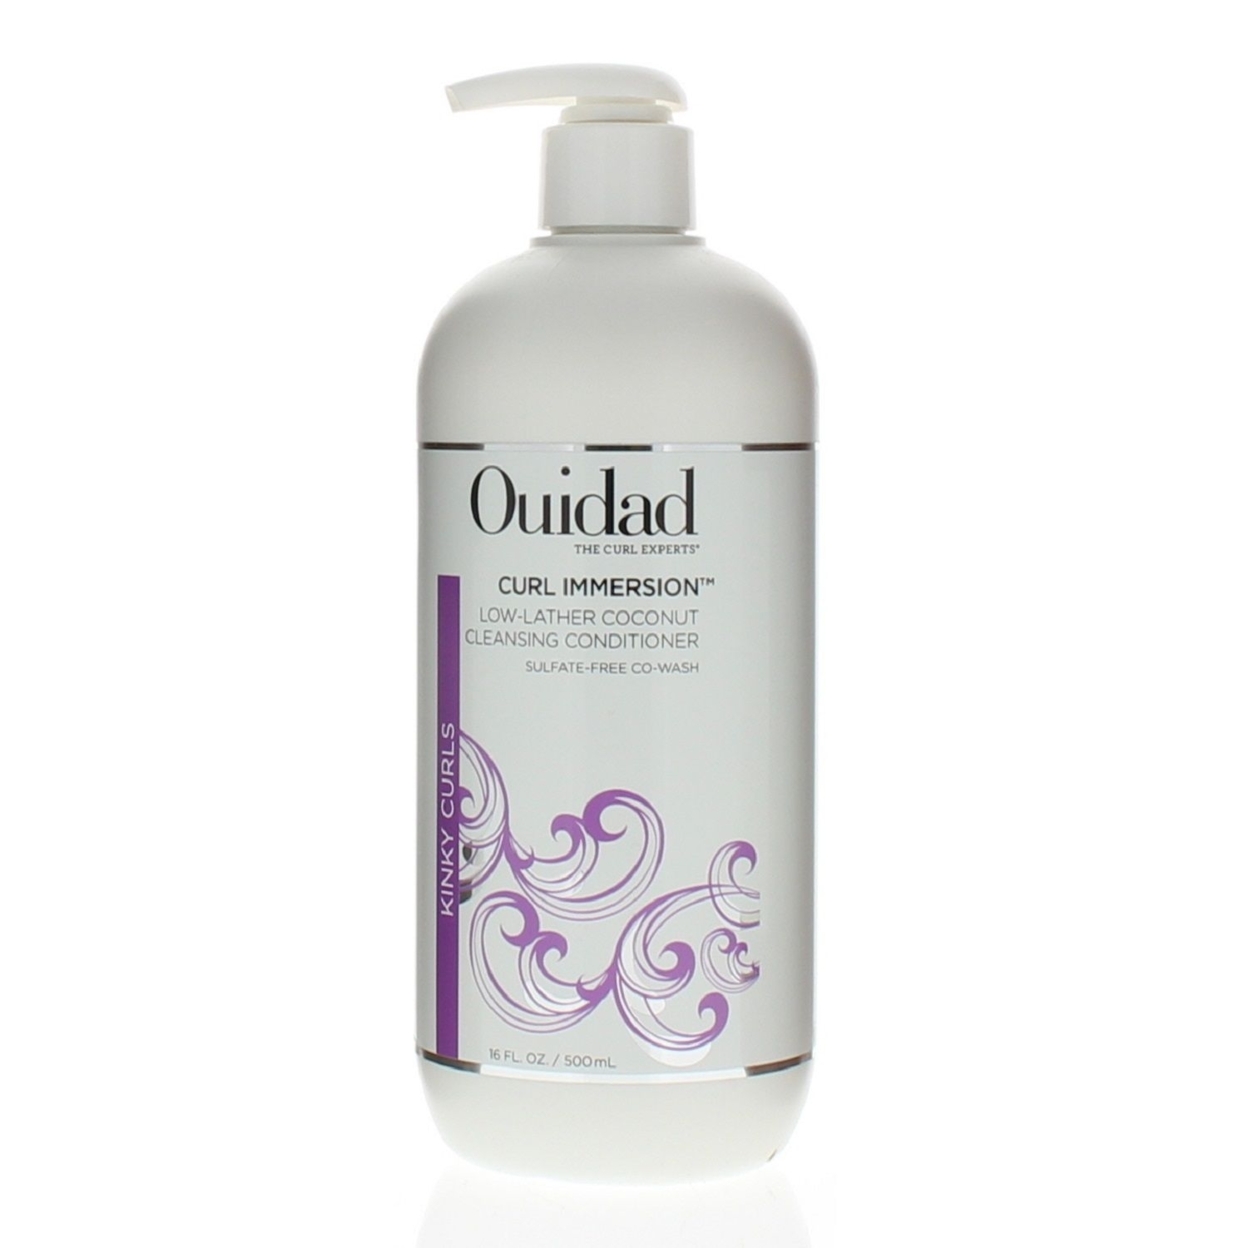 Ouidad Curl Immersion Low-Lather Coconut Cleansing Conditioner 16oz/500ml